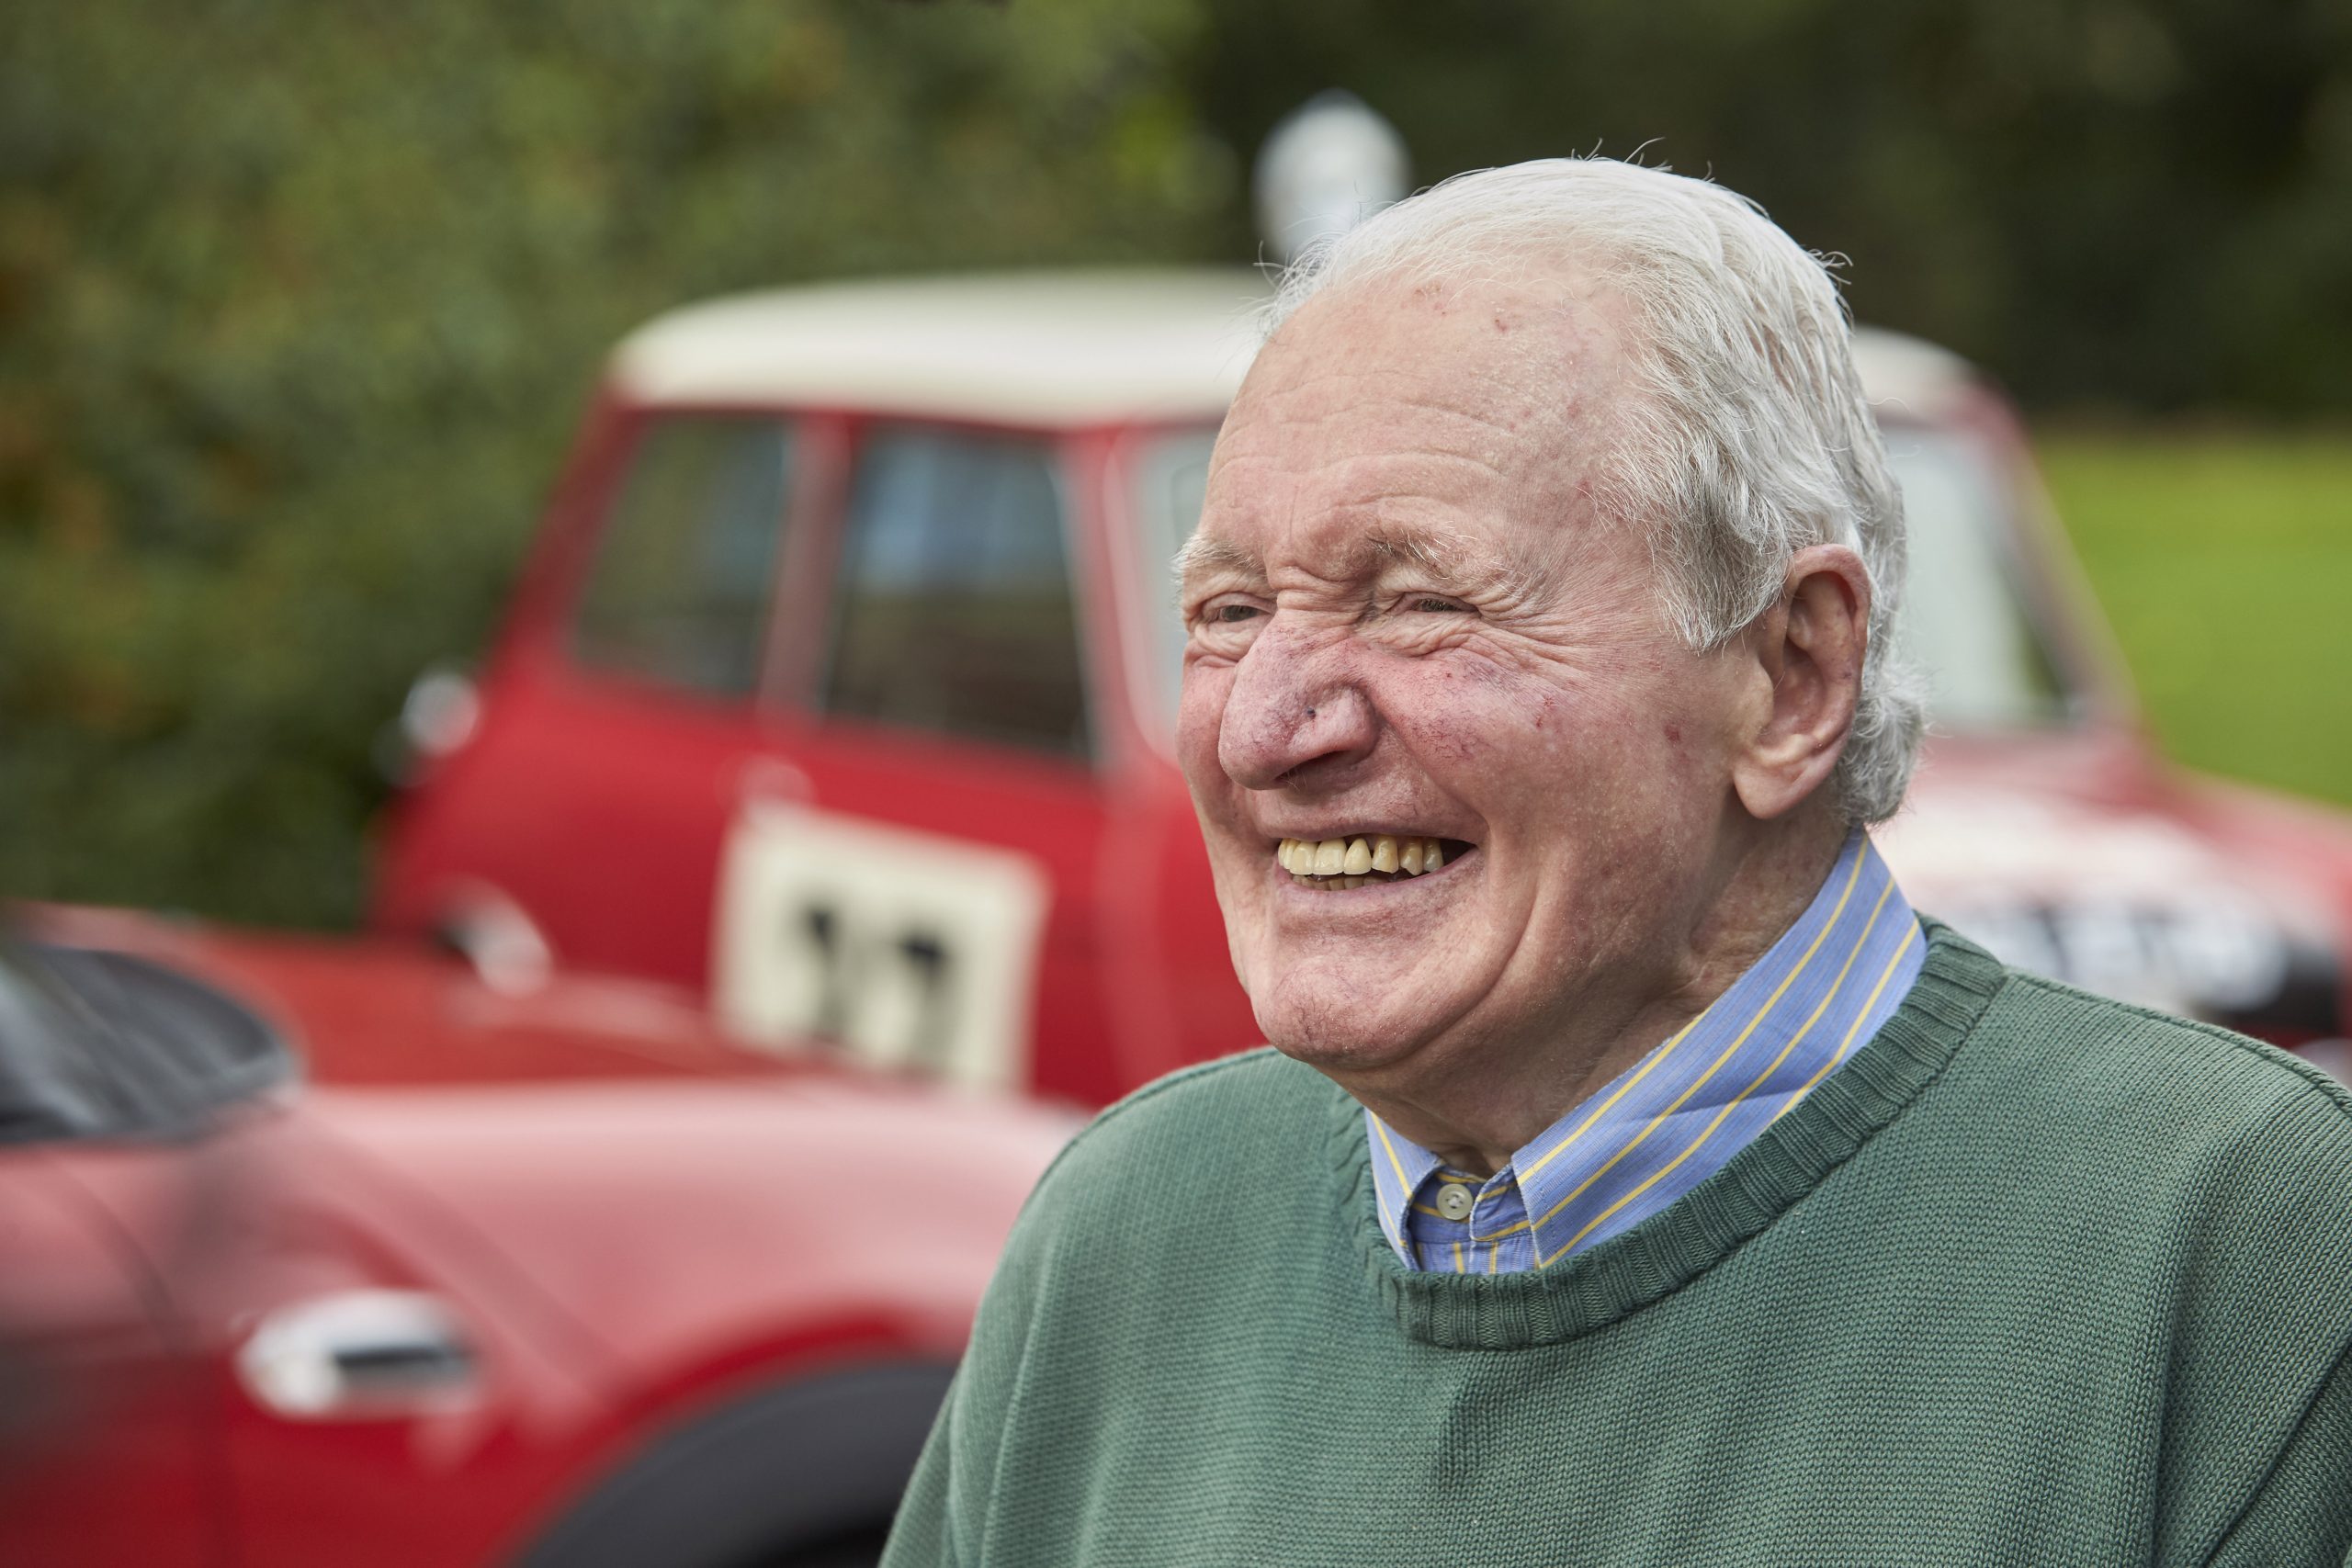 Paddy Hopkirk, the man who put the Mini on the map, has died aged 89